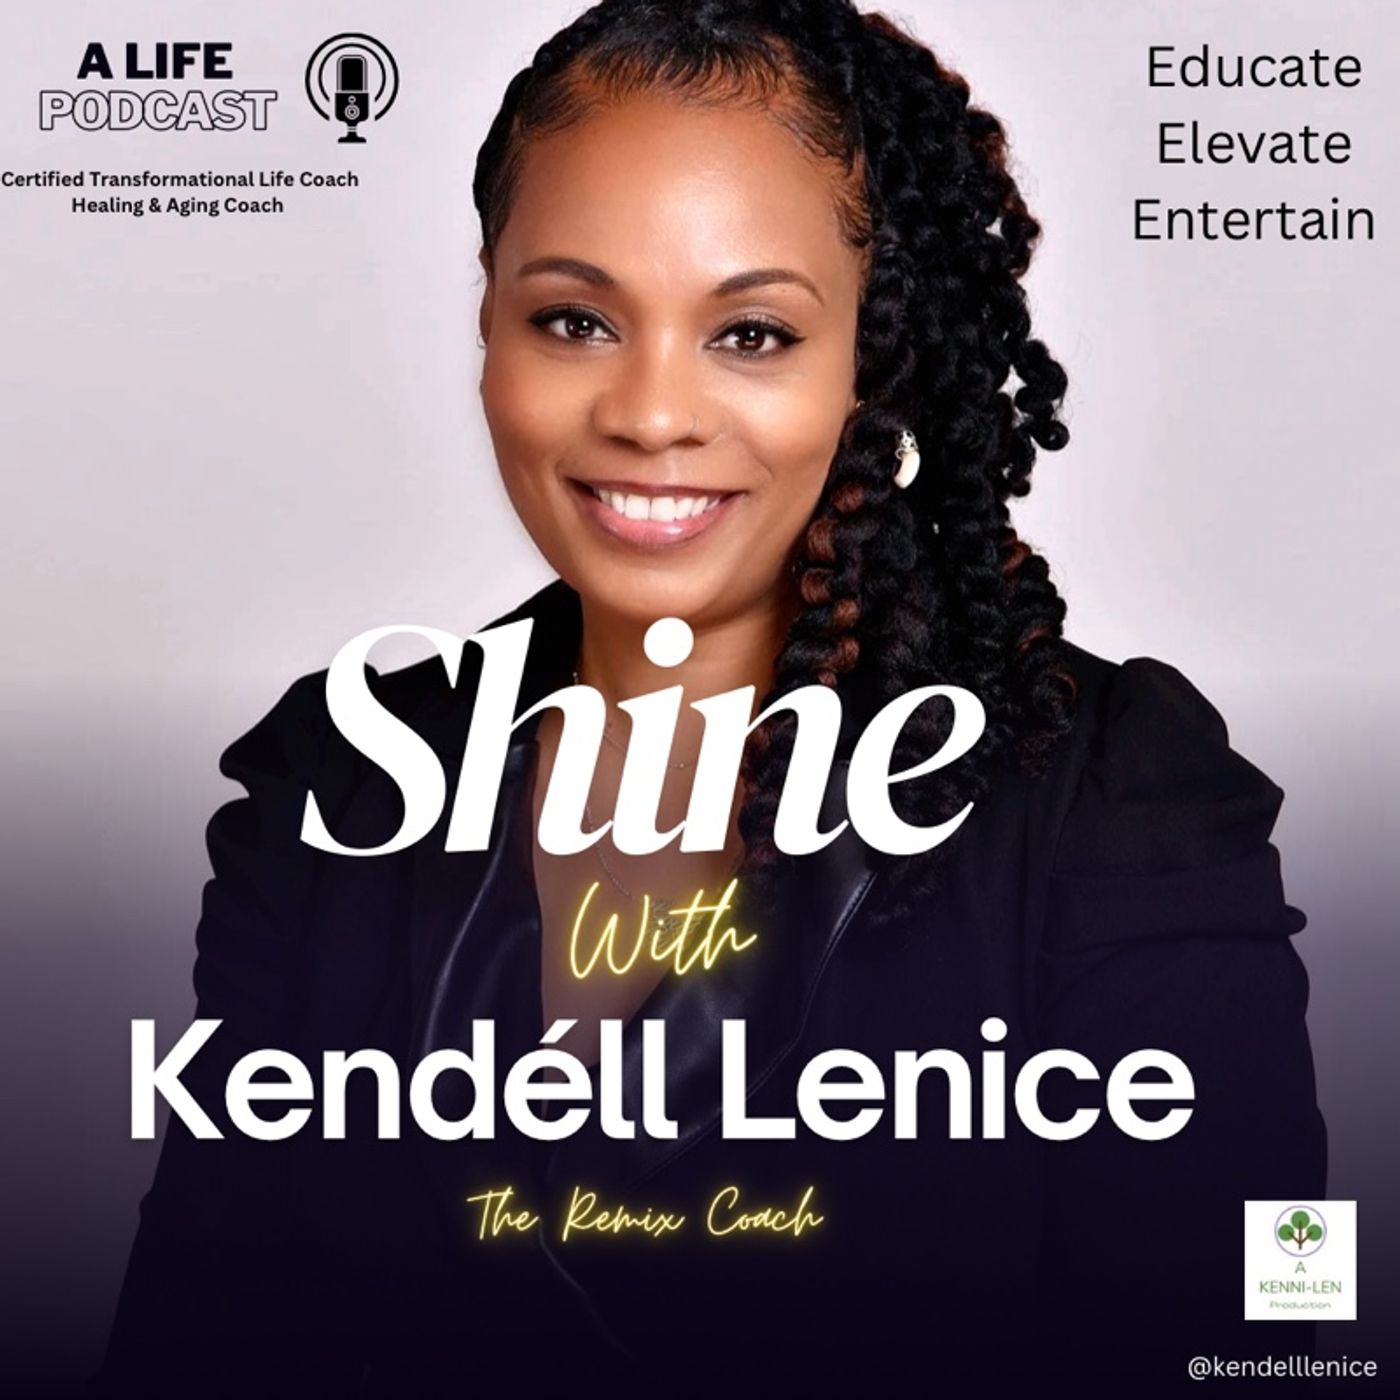 Episode 221 - What We Know About Relationships-Public, Private or Otherwise [Season 11] SHINE with Kendéll Lenice